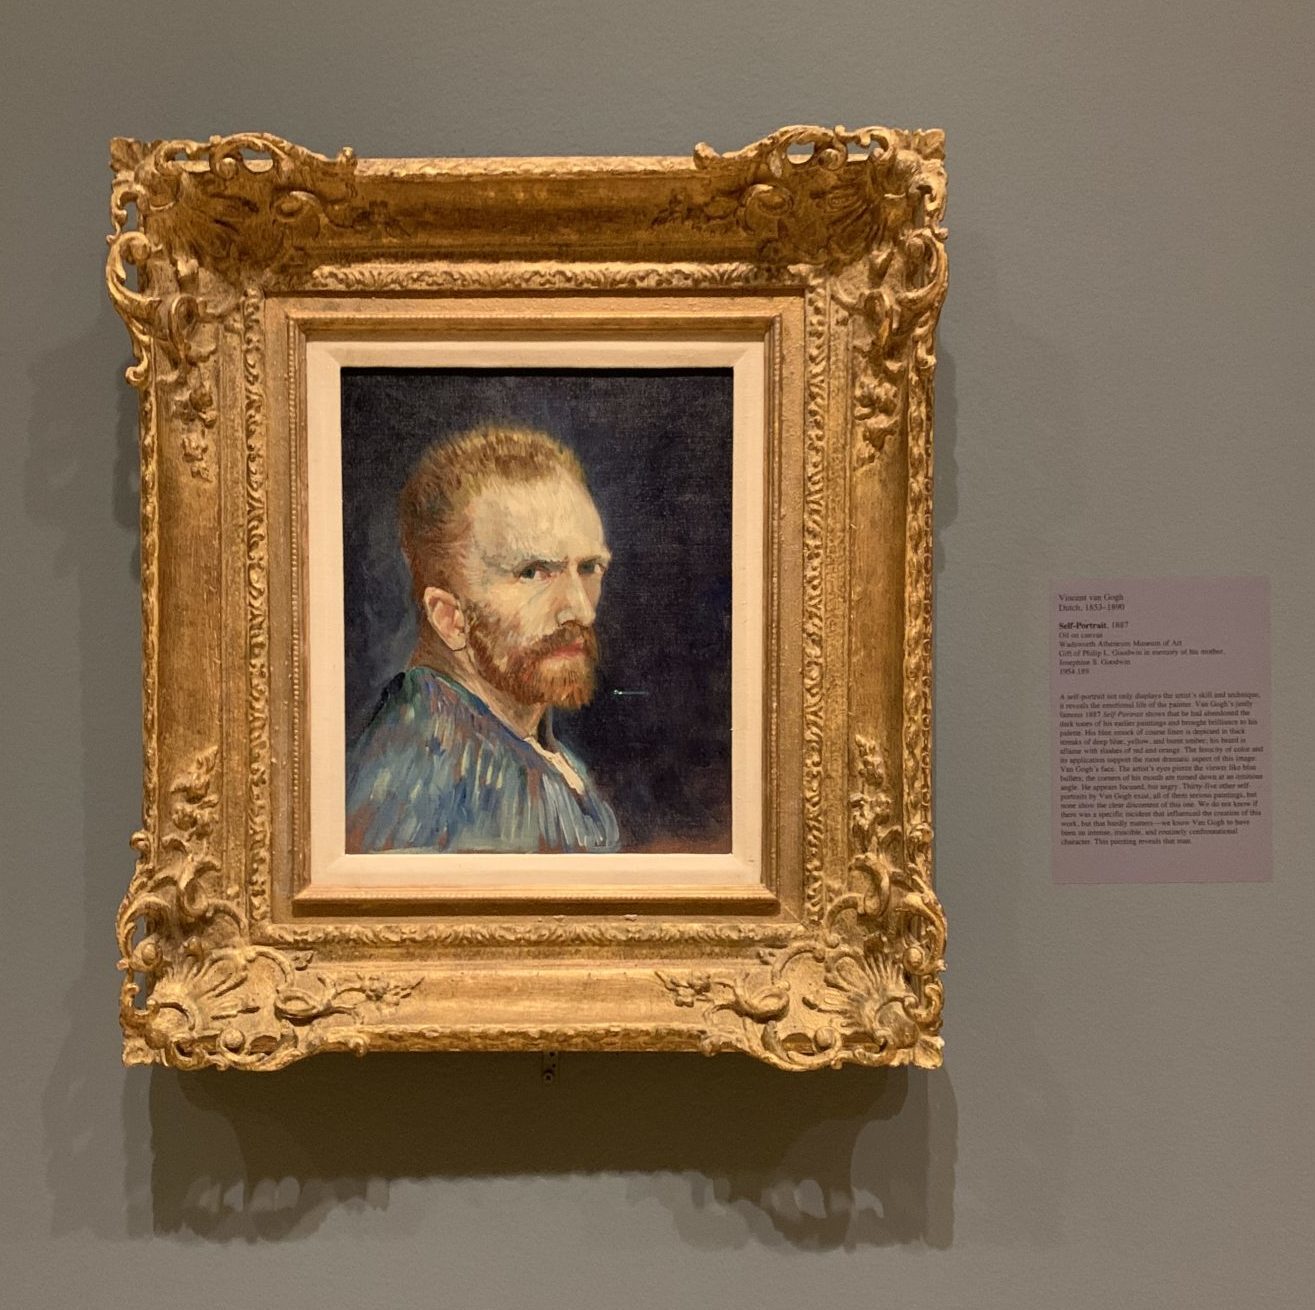 Making Time for Art – My Trip to See Van Gogh